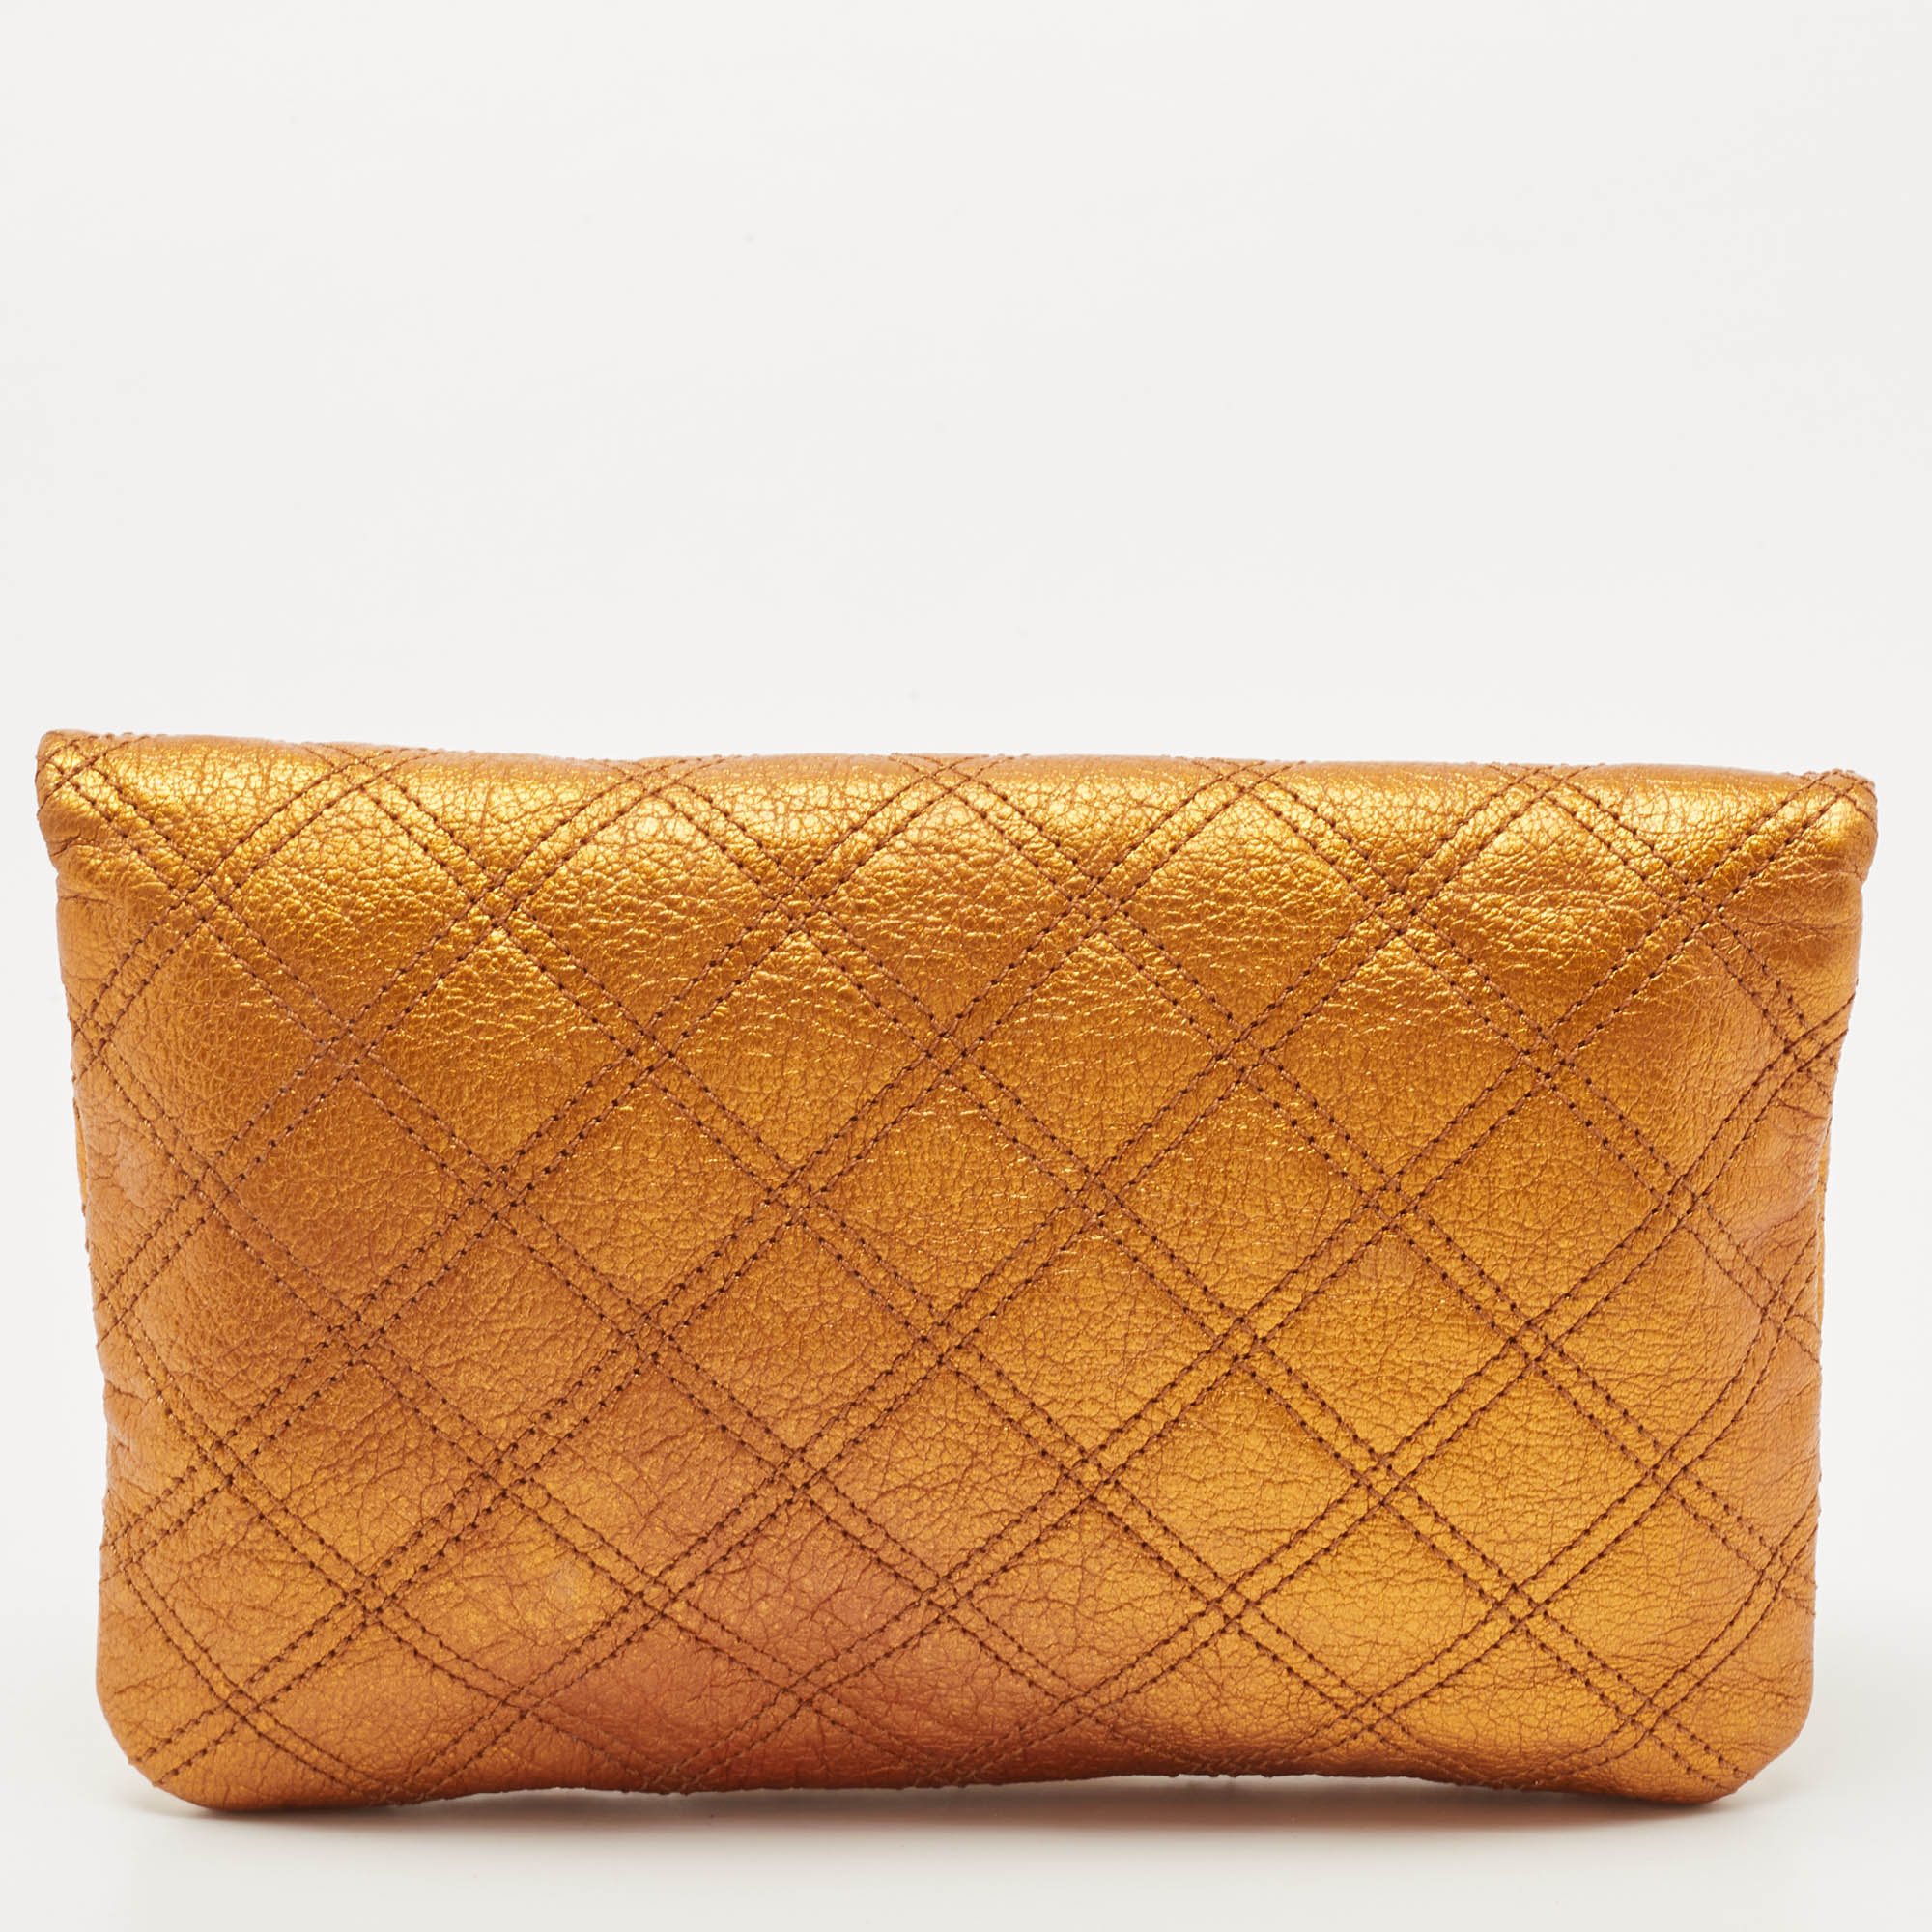 Marc Jacobs Metallic Orange Quilted Leather Eugenie Clutch